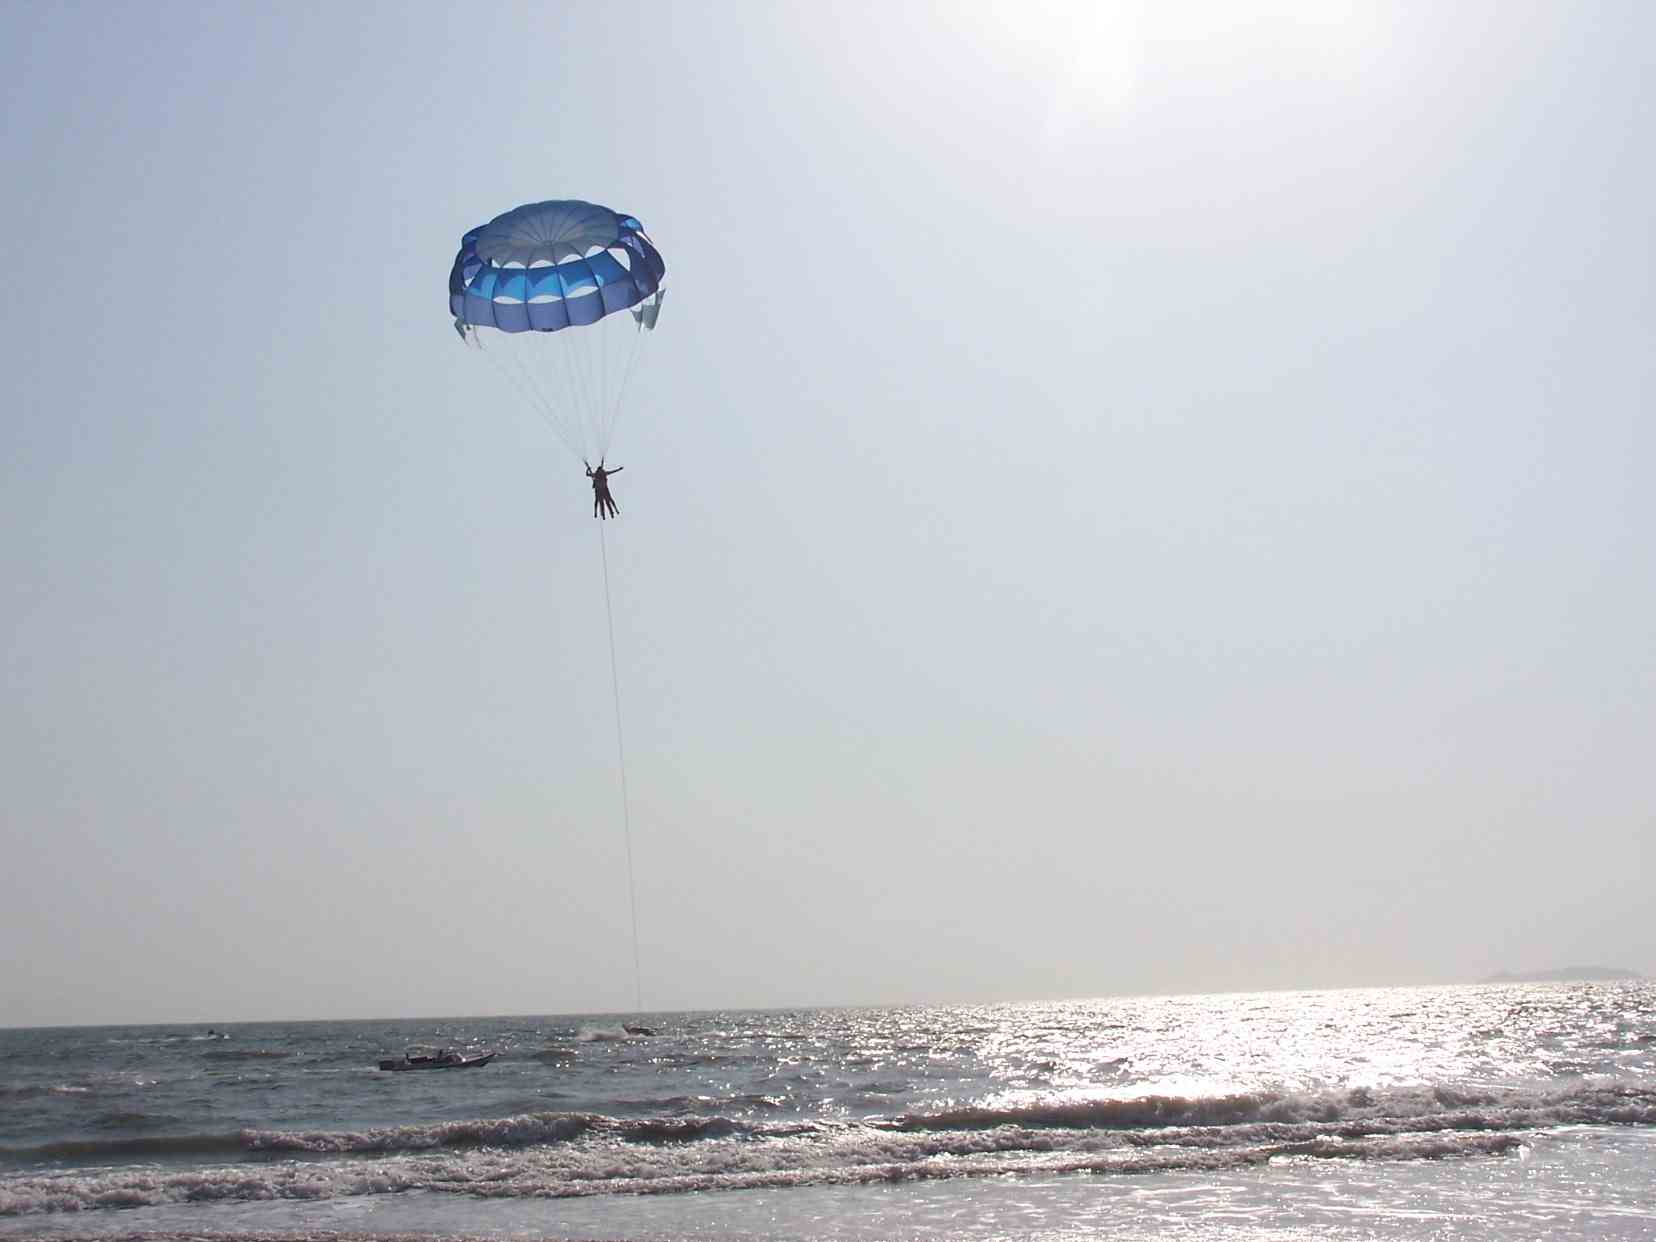 Parasailing is a generally unregulated industry.